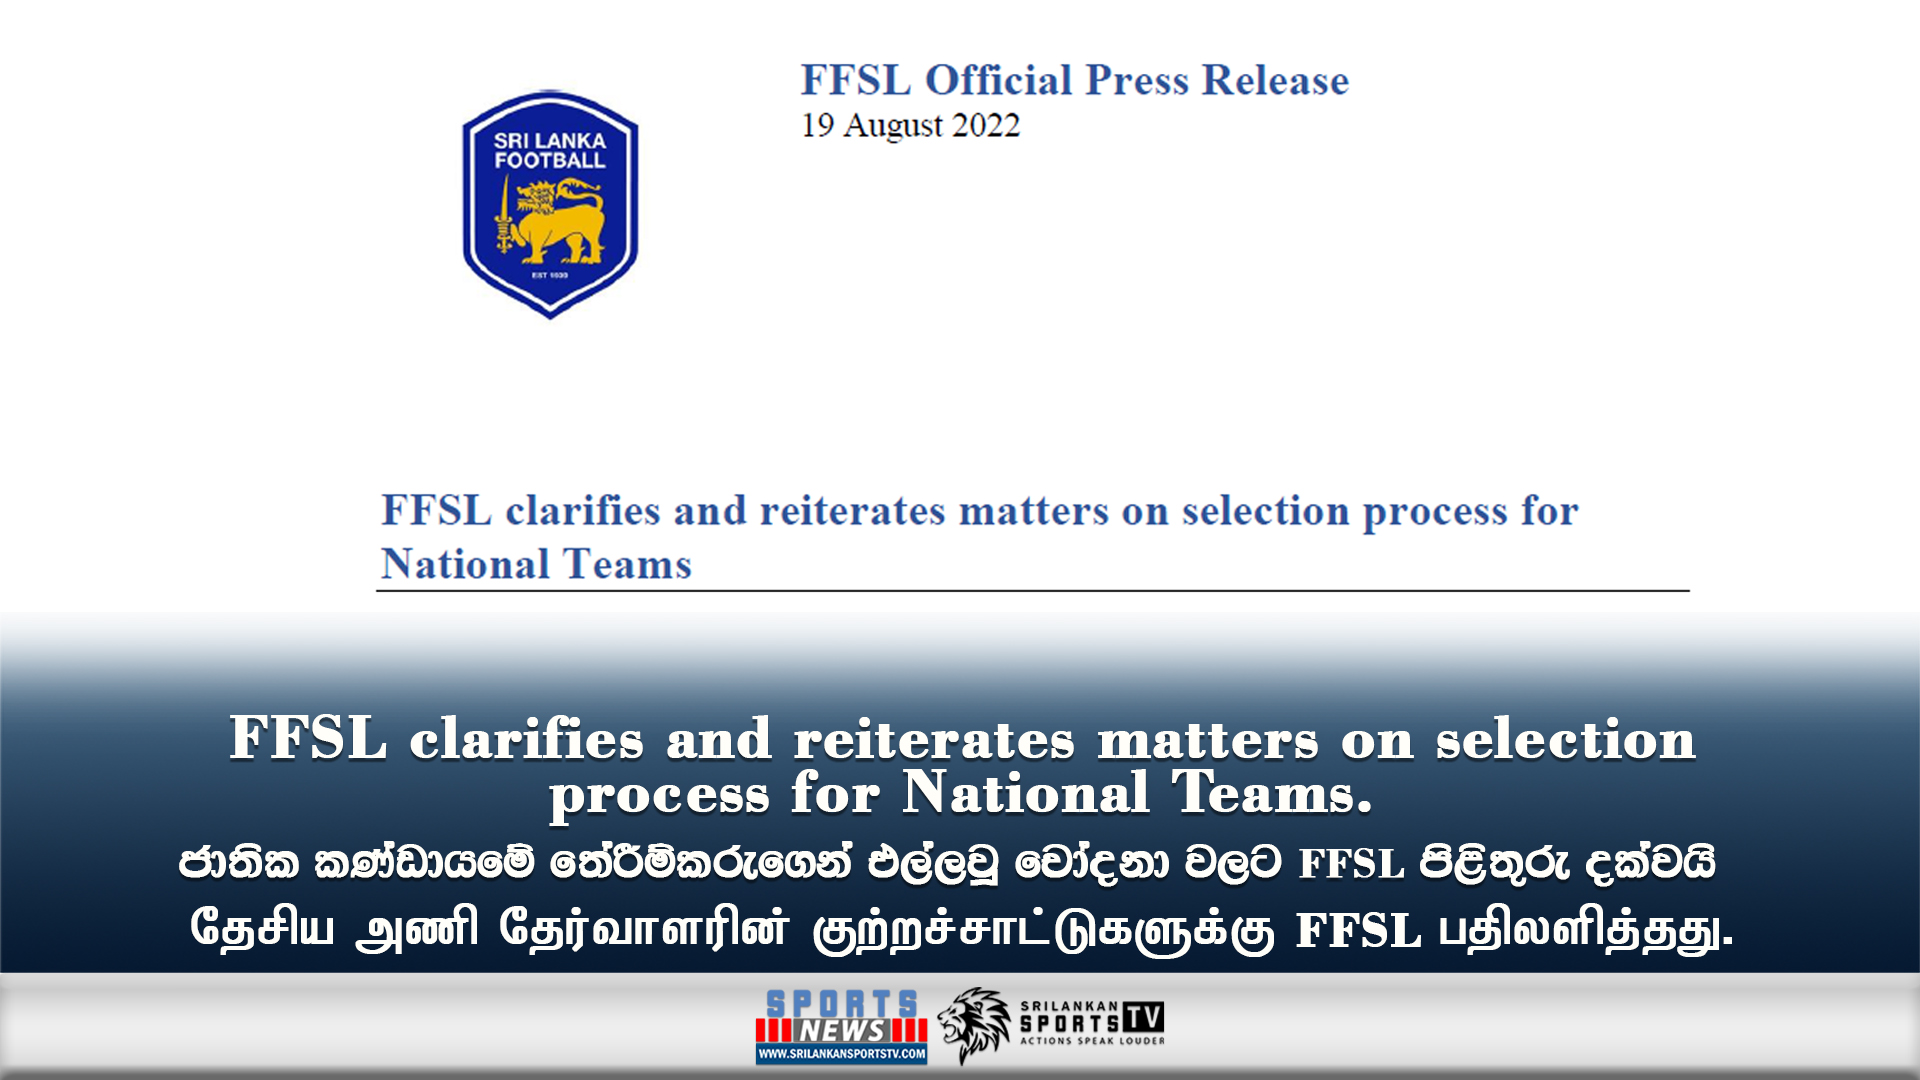 FFSL clarifies and reiterates matters on selection process for National Teams.